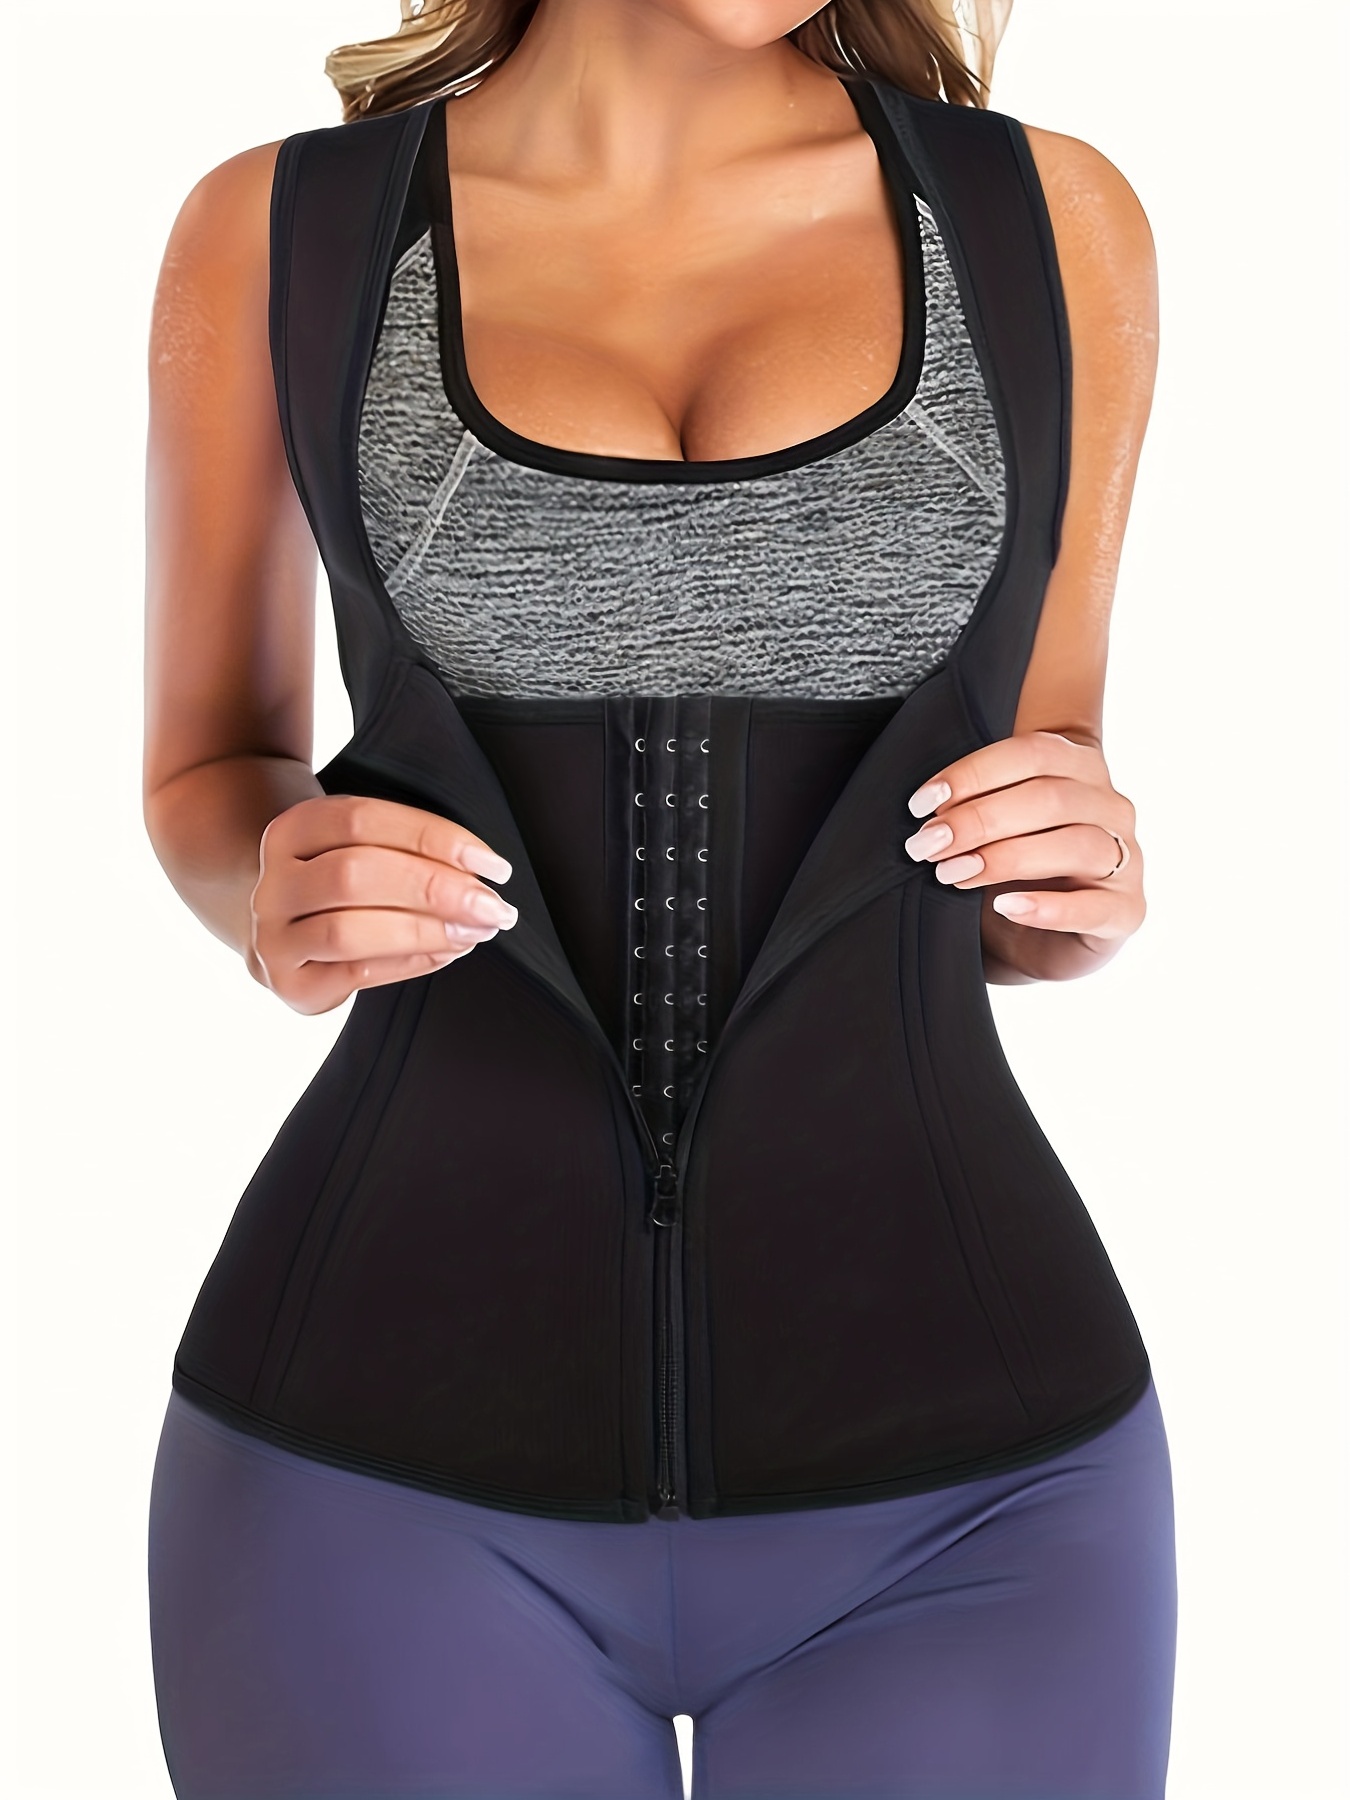 Shape Your Body Instantly with Women's Sleeveless Compression Sweat Vest!